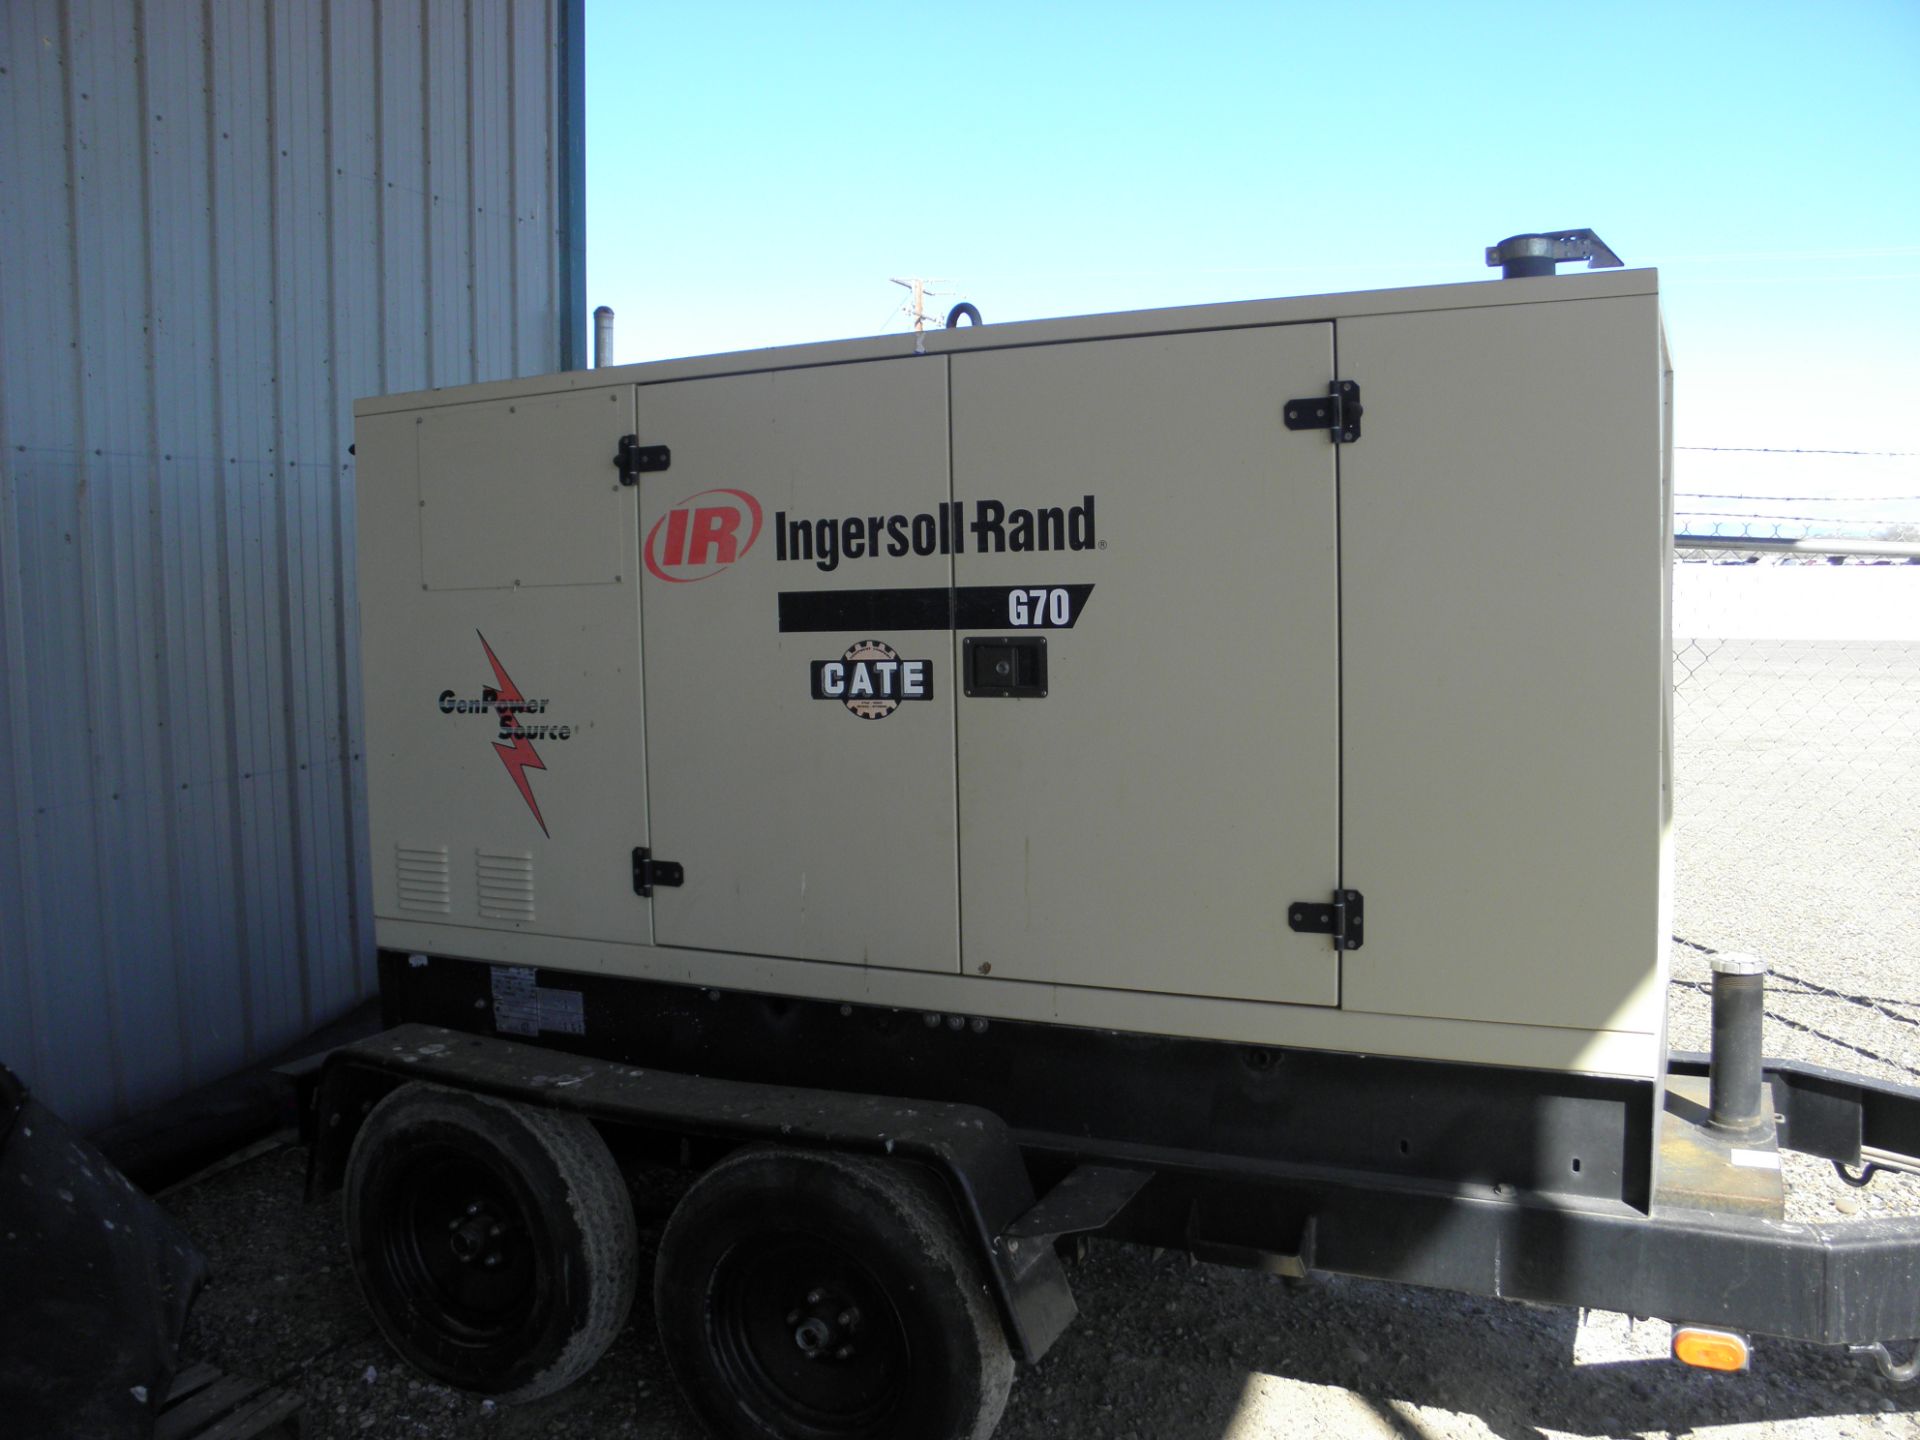 Ingersol Rand G 70 Gen power 70KW on tandem trailer 3phase or single phase; under 6500 hours